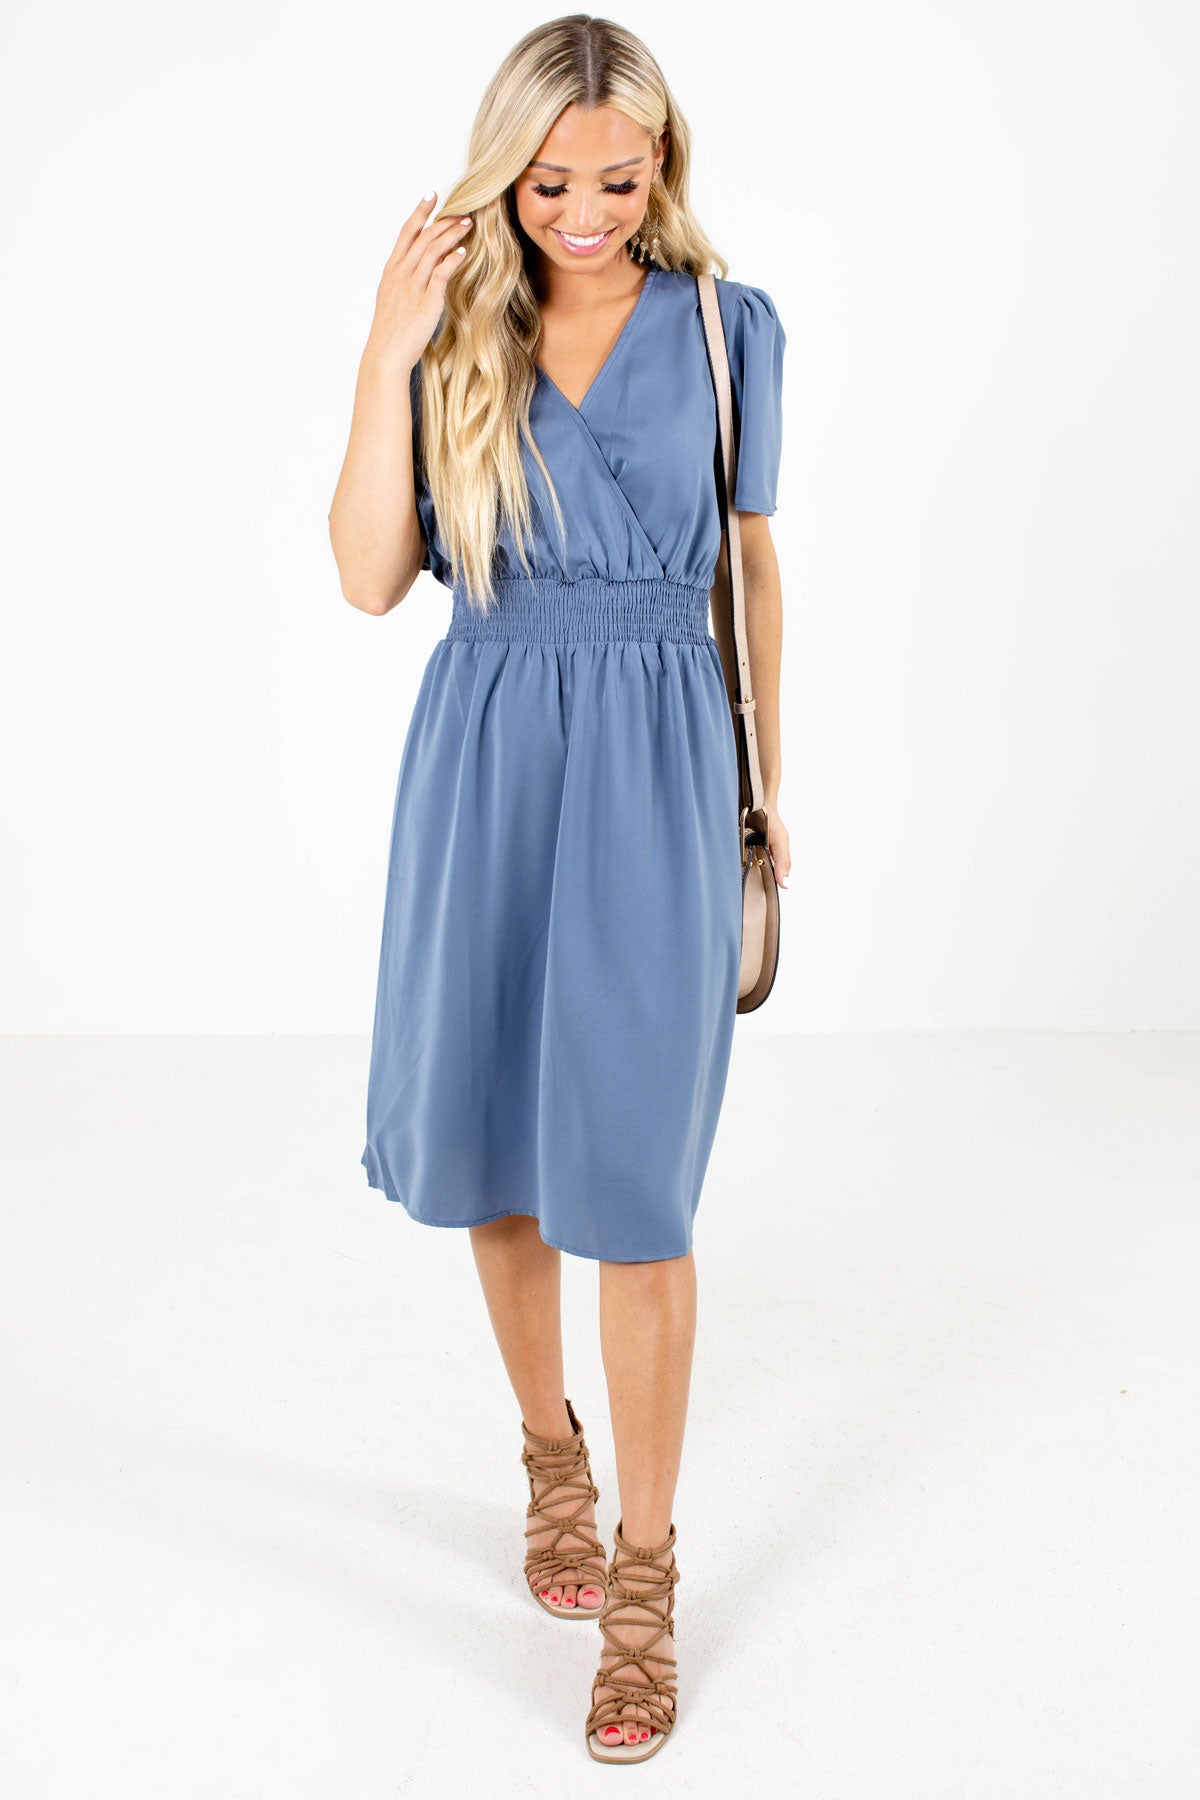 Blue Cute and Comfortable Boutique Knee-Length Dresses for Women